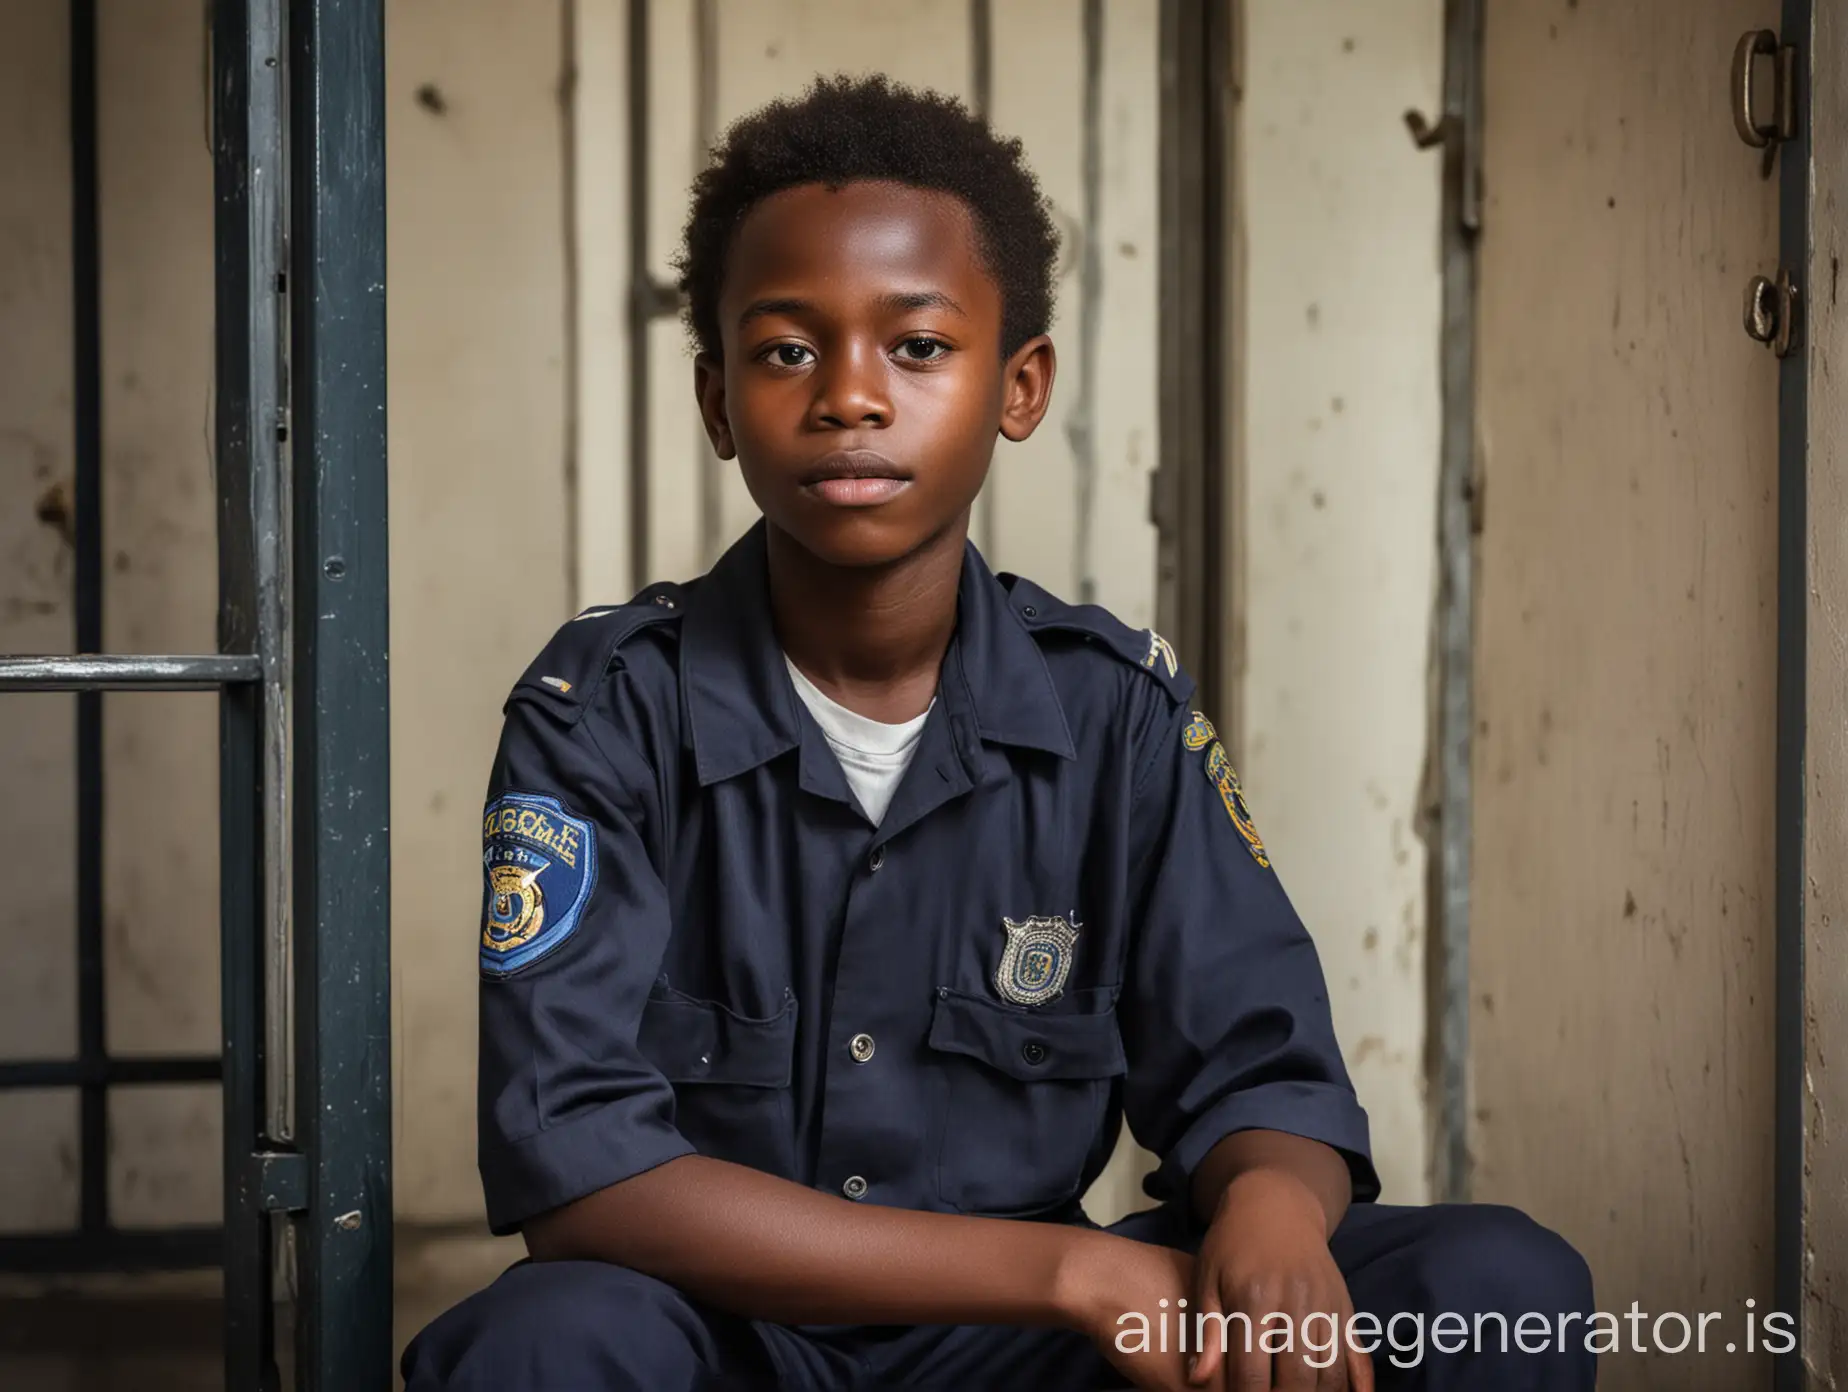 young african boy 15 years sitting inside police station cell